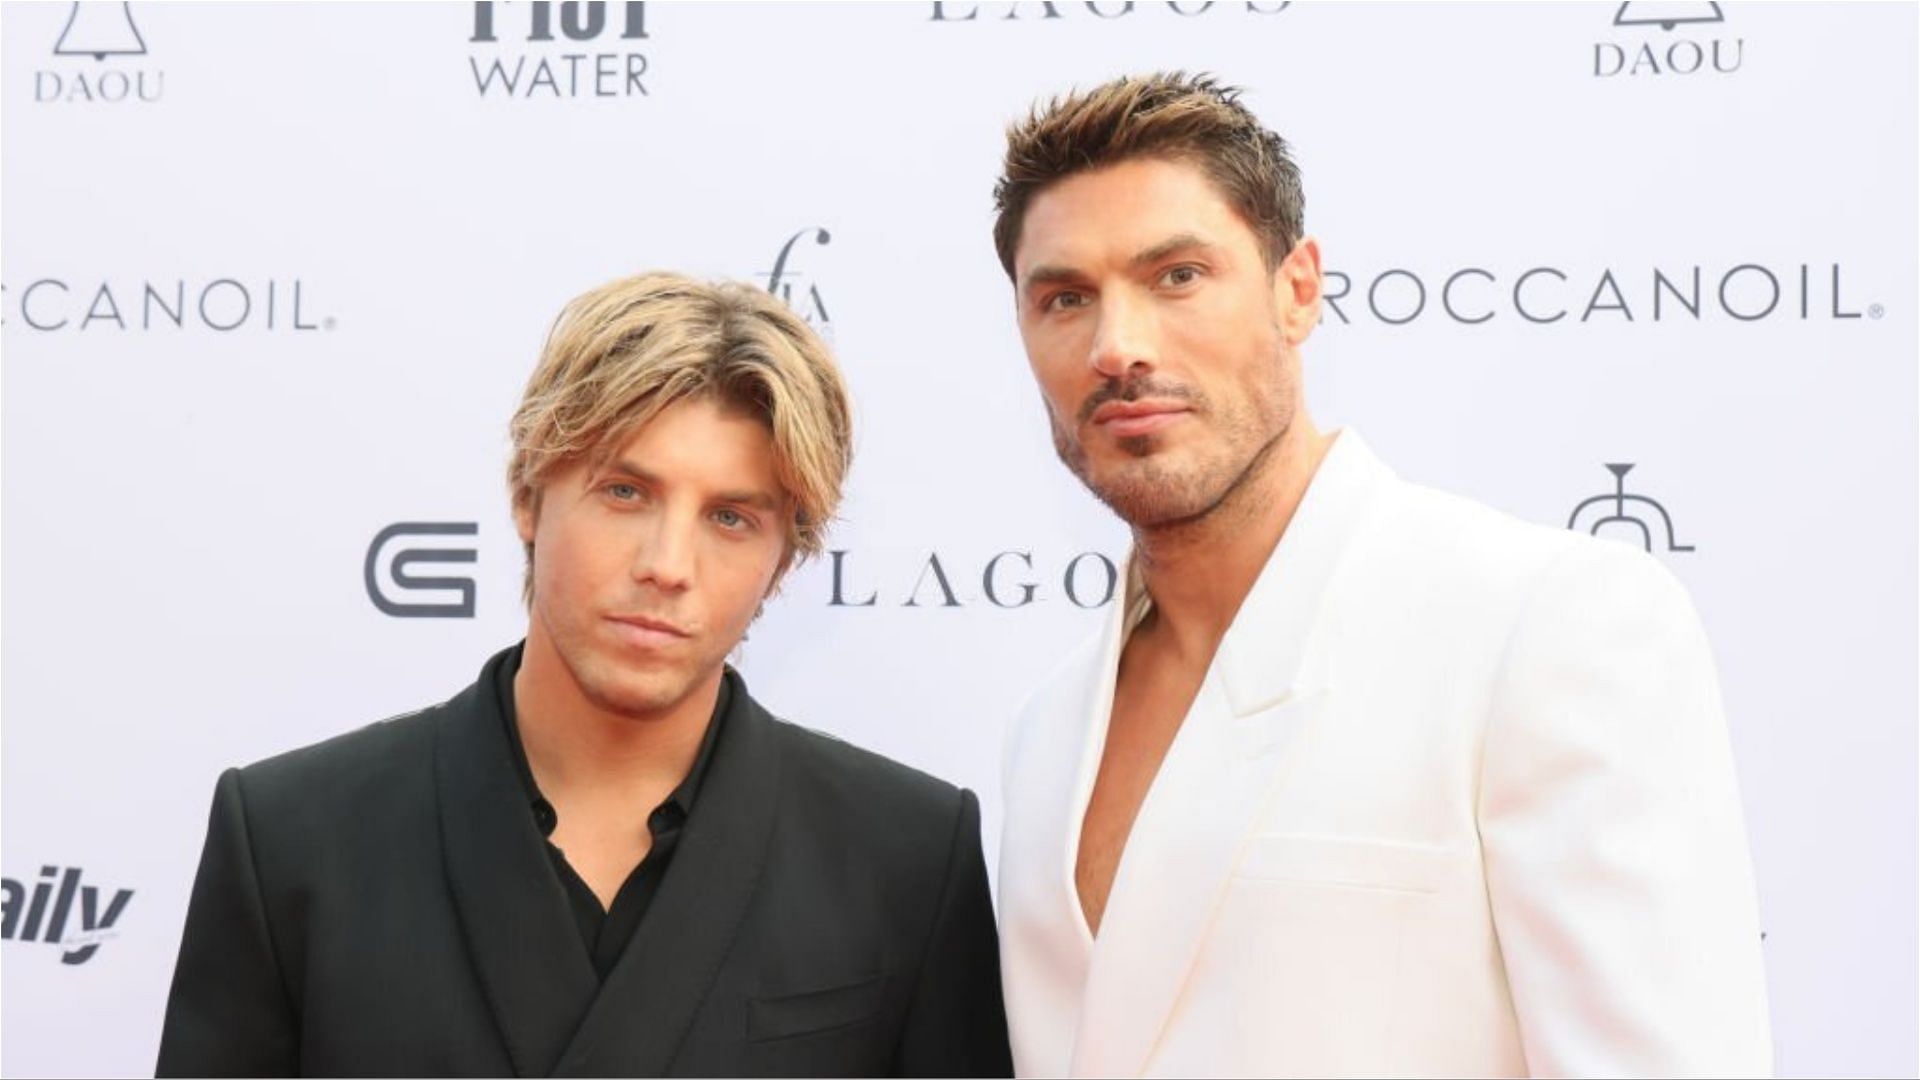 Lukas Gage and Chris Appleton are married now (Image via Rodin Eckenroth/Getty Images)